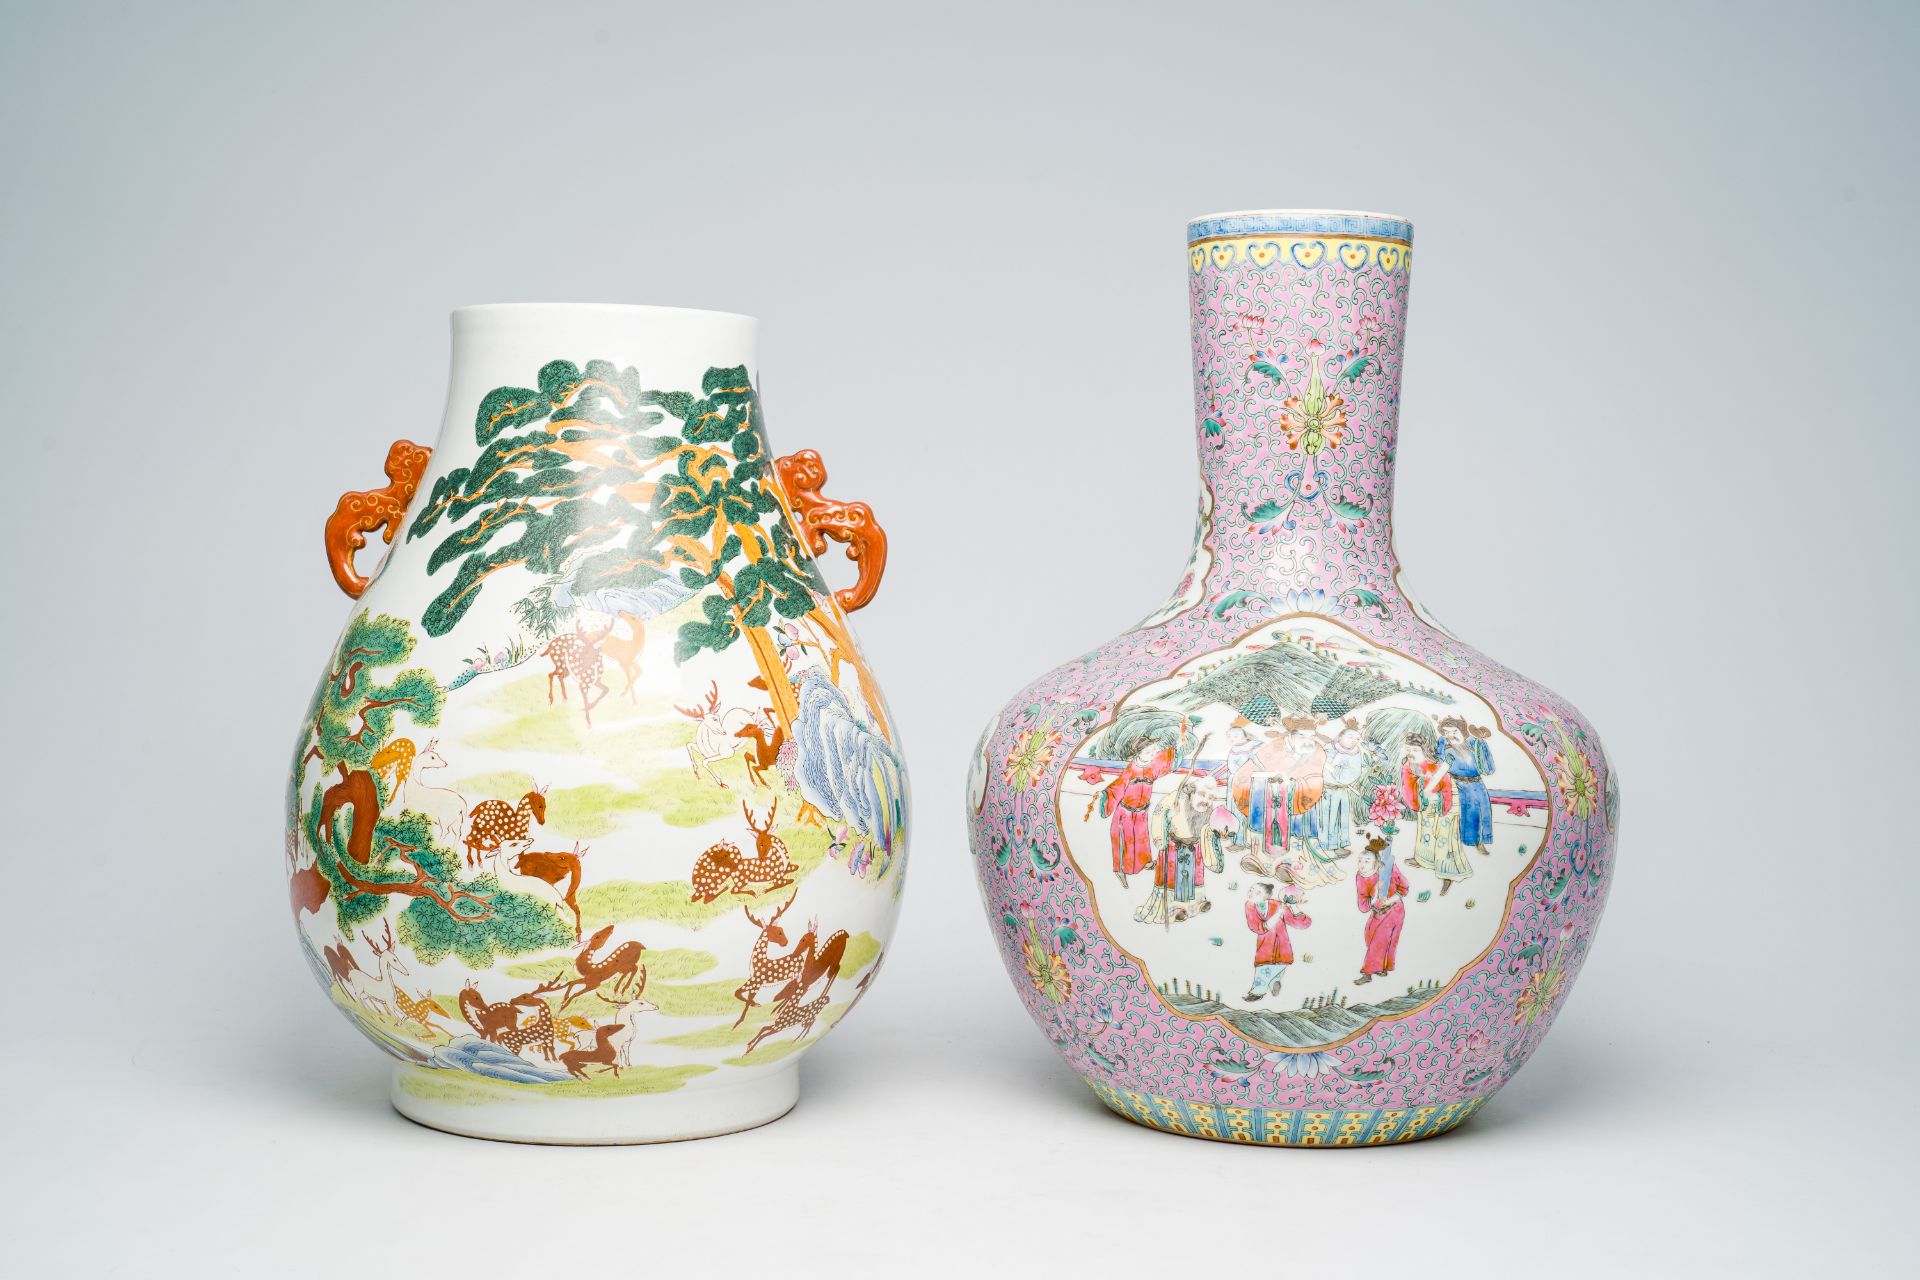 A Chinese famille rose tianqiu ping vase with Immortals and their servants in a landscape and a fami